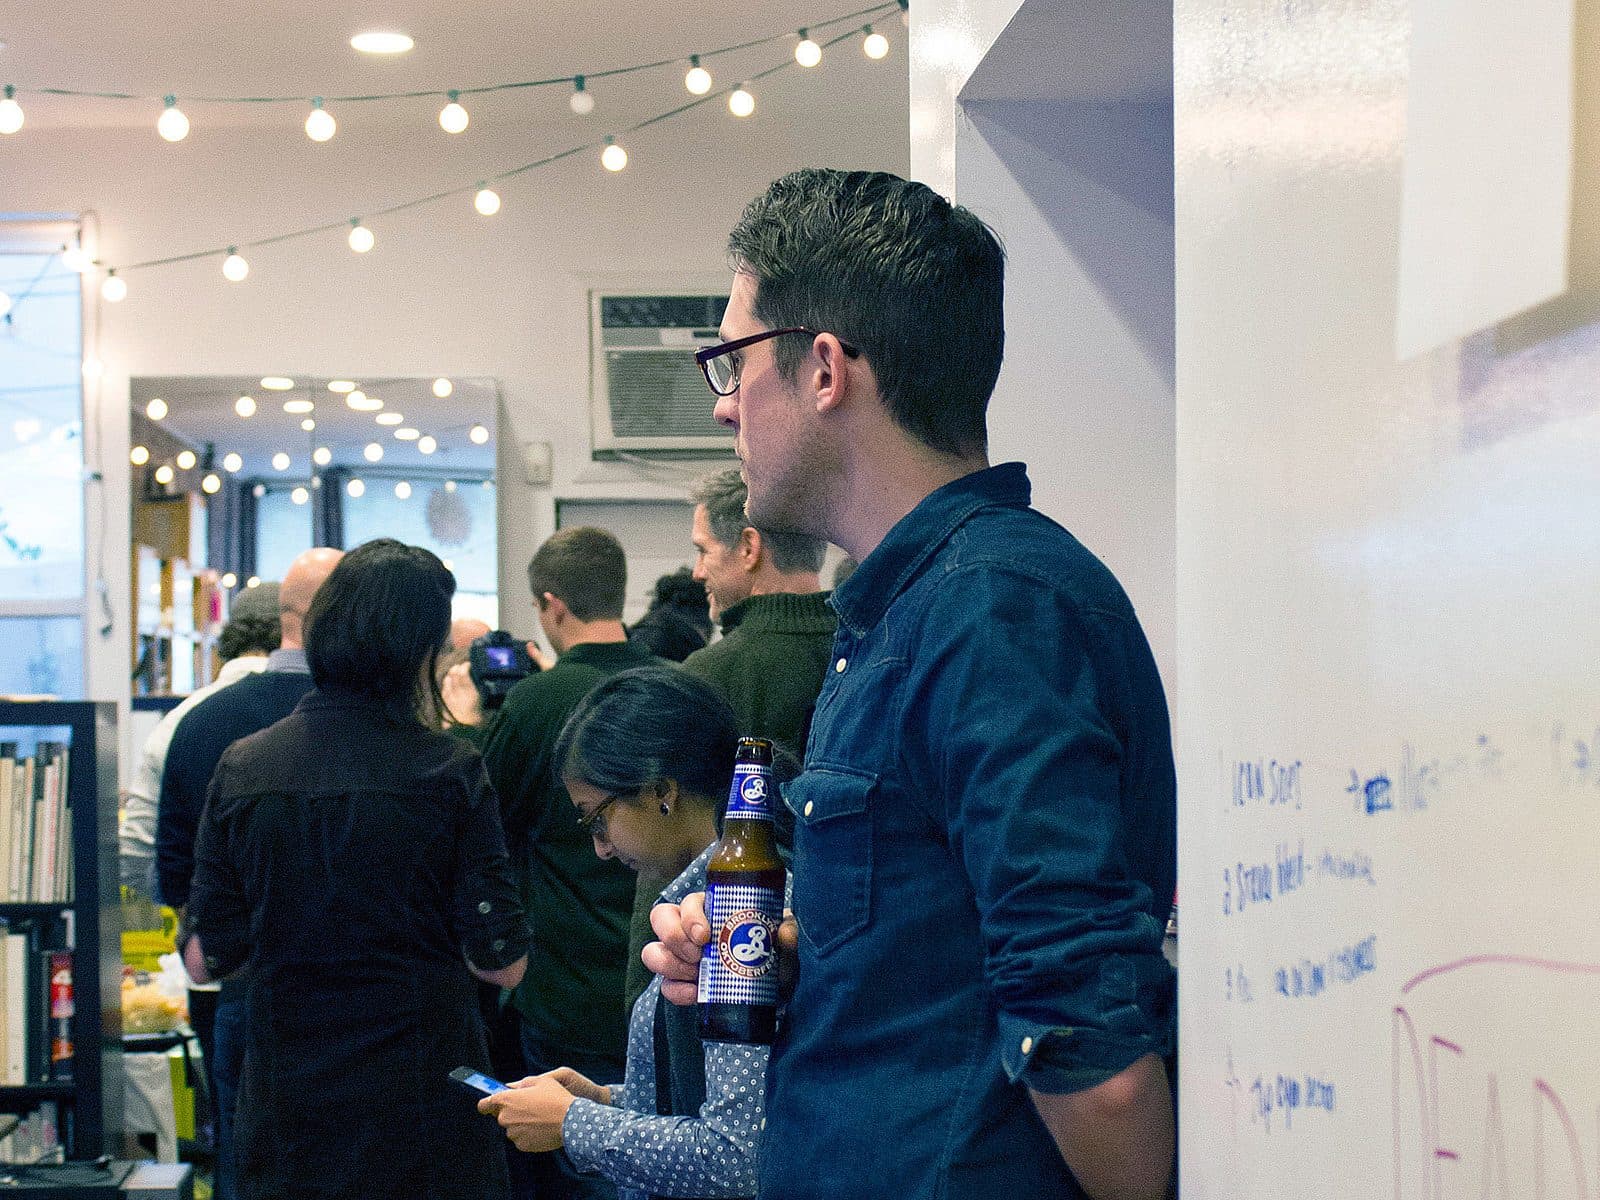 A man in glasses is holding a beer bottle, leaning against a wall in a well-lit room with string lights. Several people are gathered around, some chatting and some looking at their phones. Bookshelves and a window can be seen in the background.